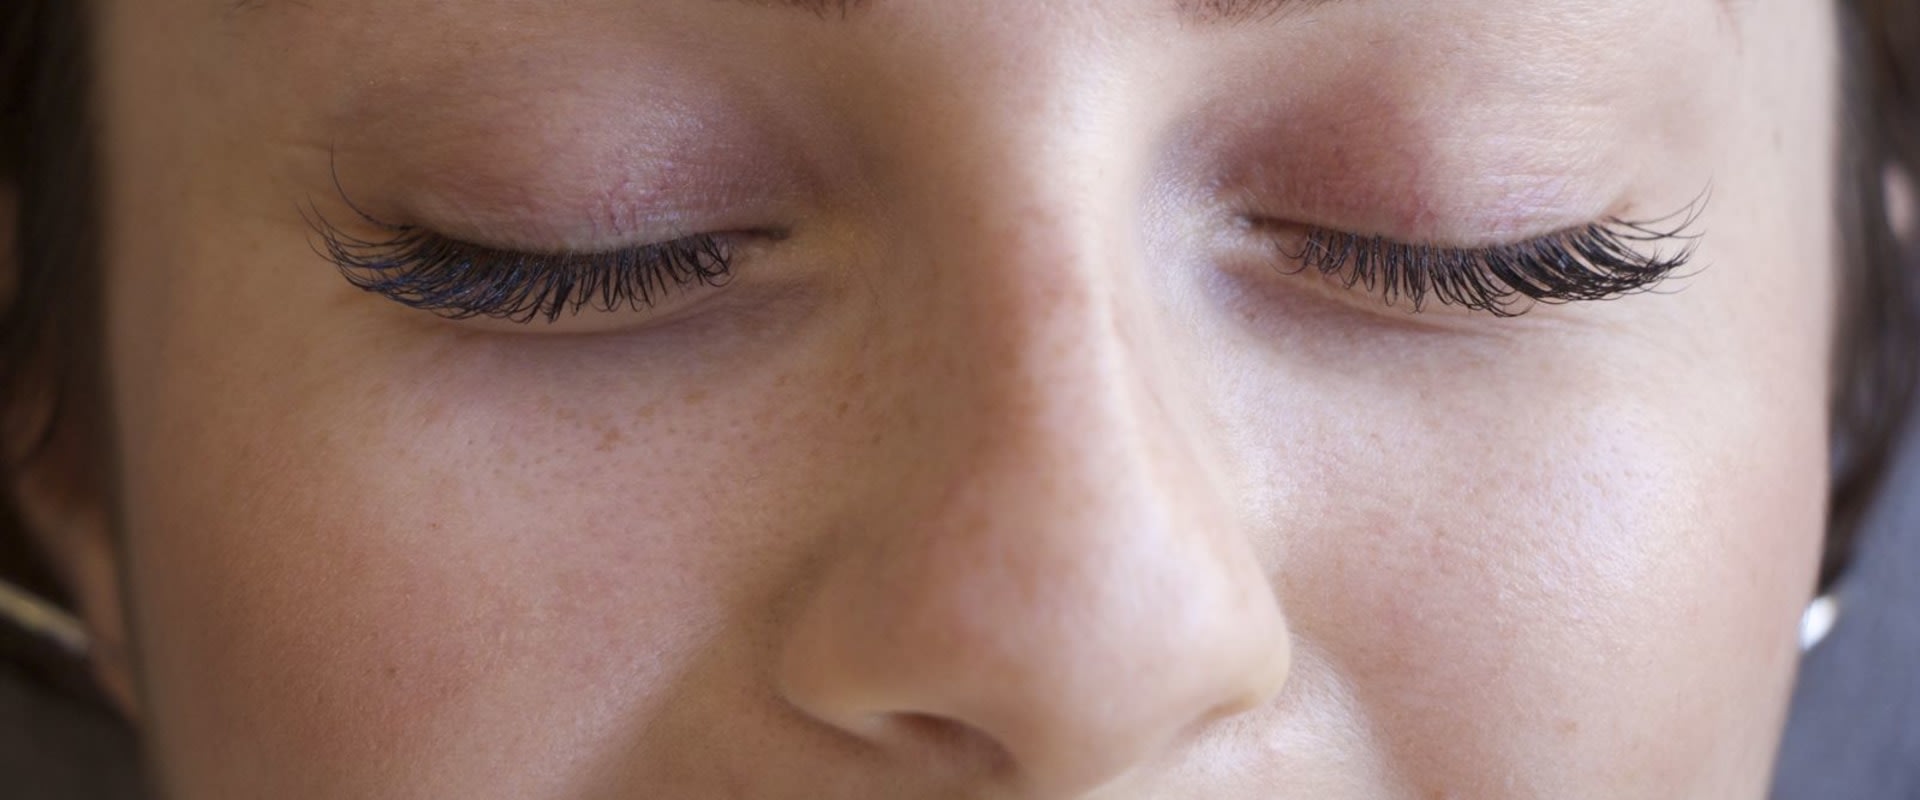 Why do eyelash extensions make your lashes shorter?